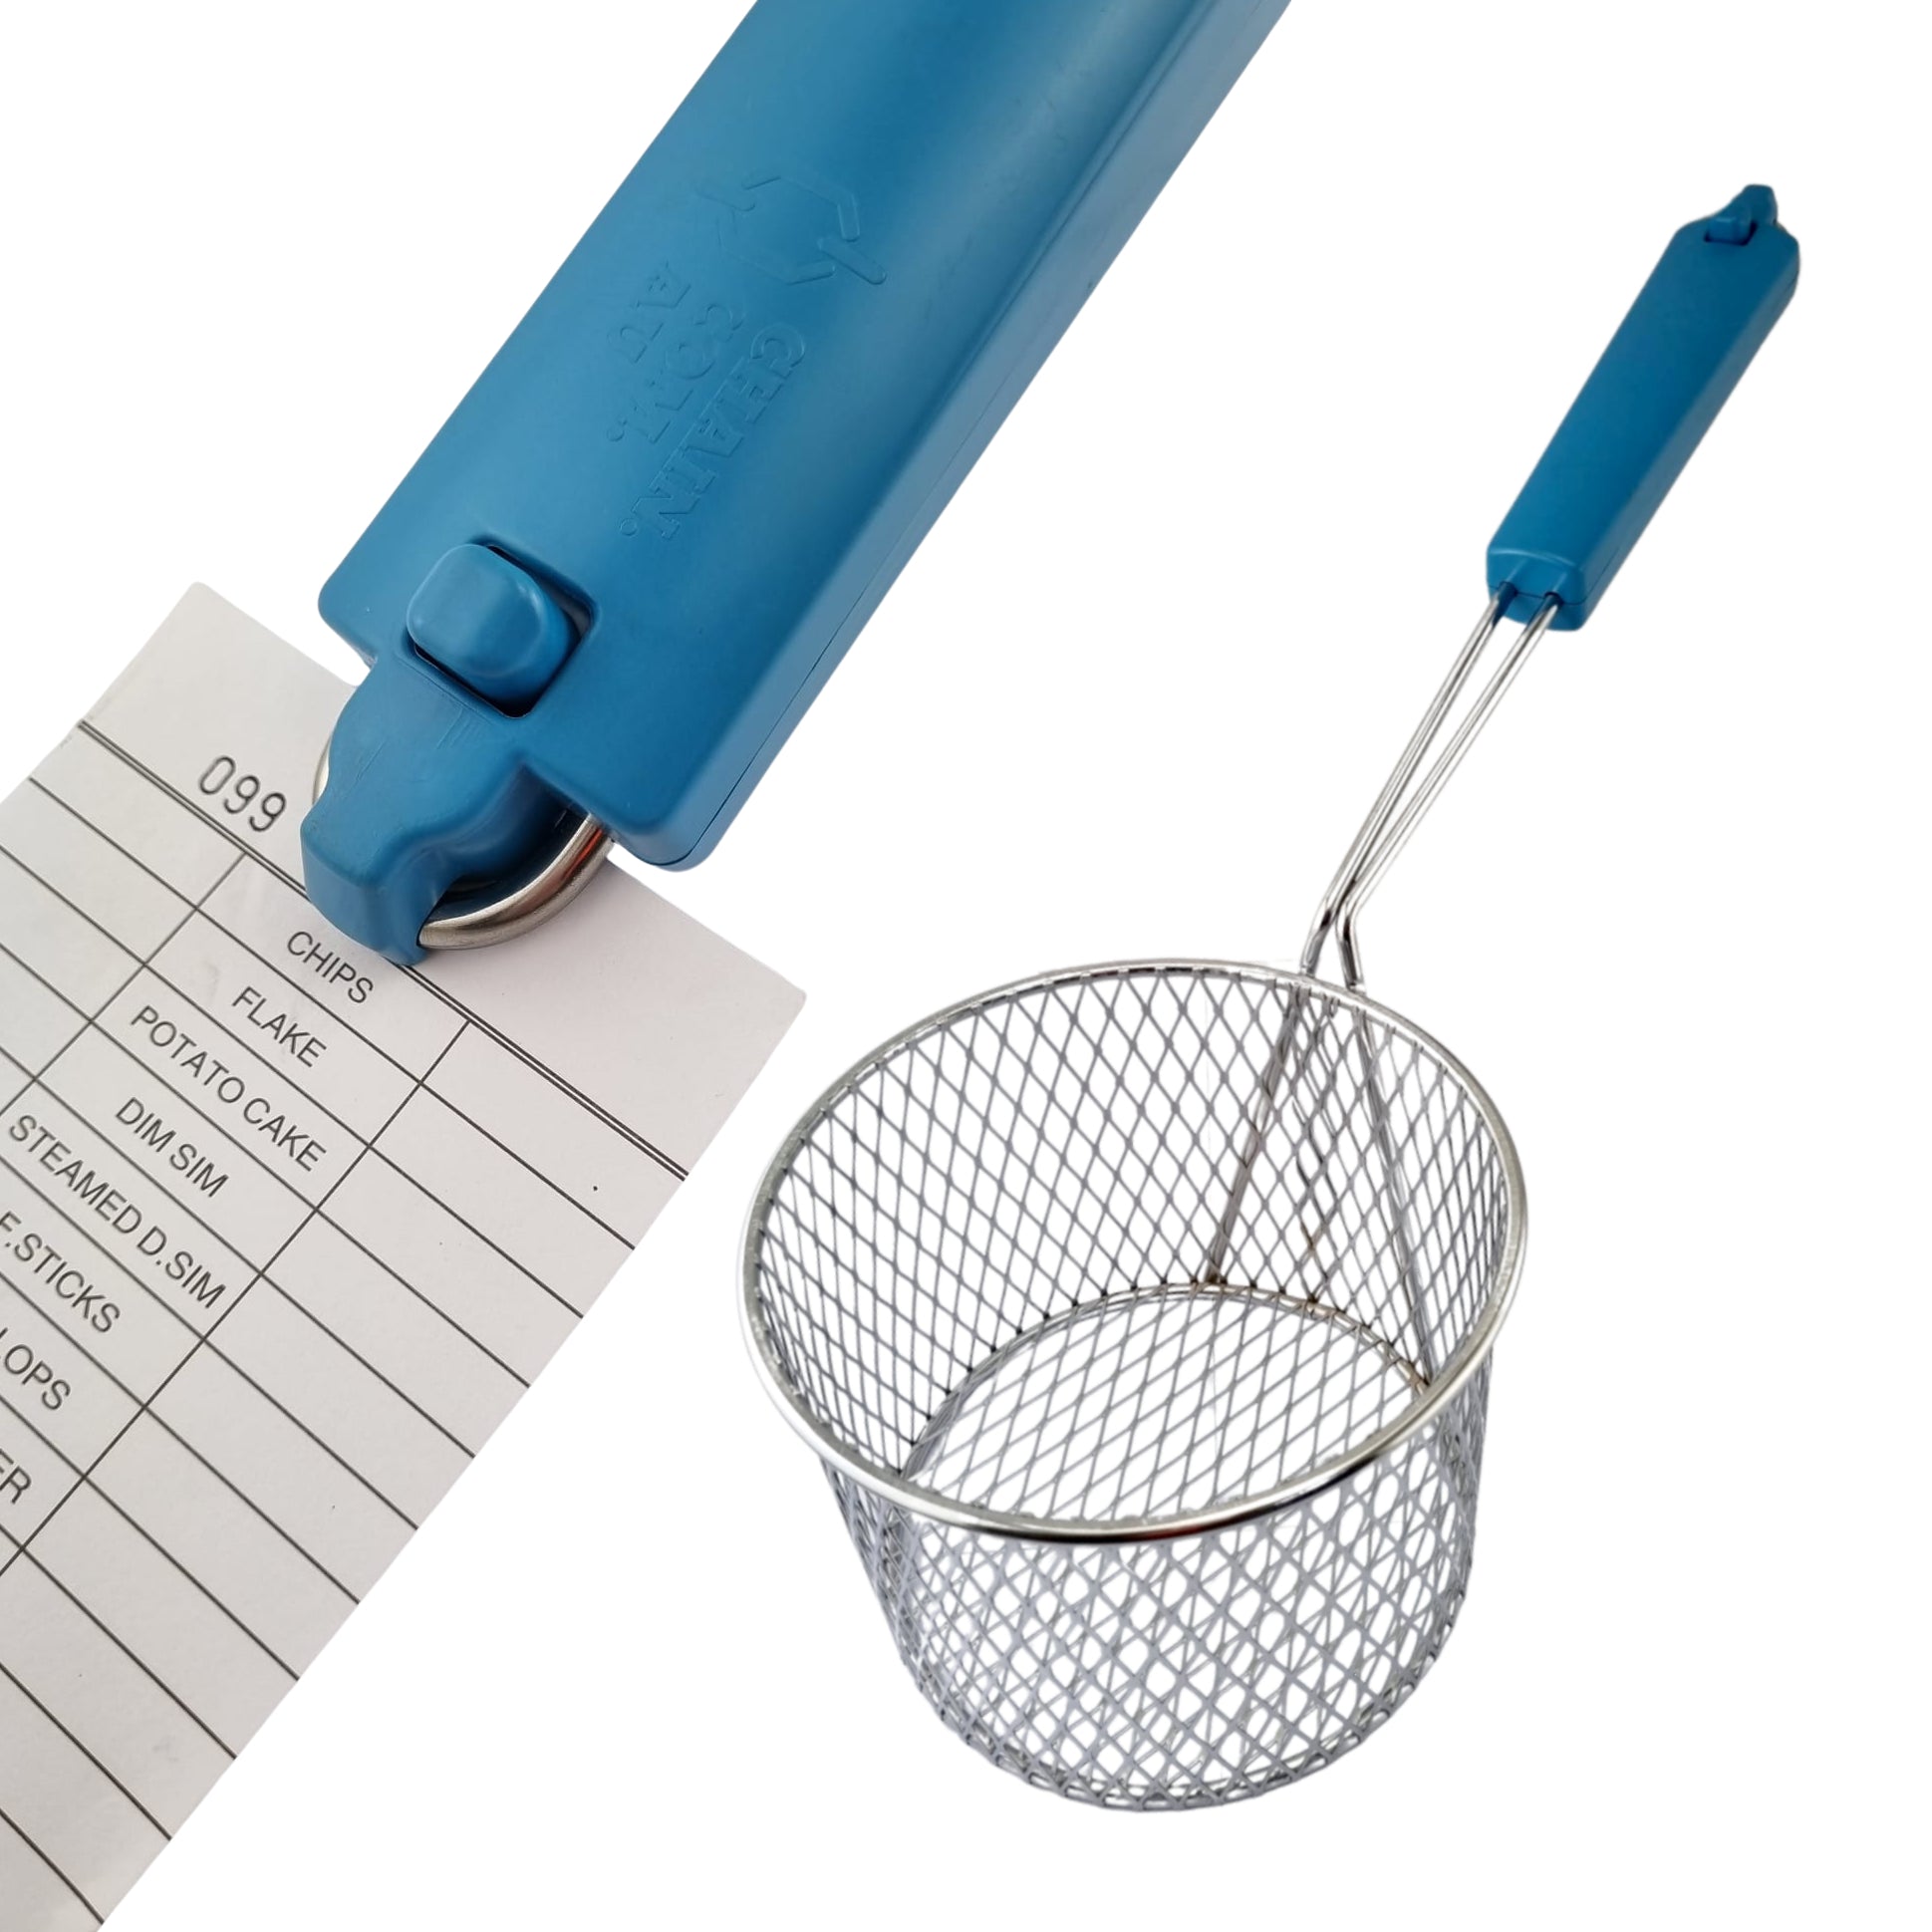 Deep Fryer Basket - Round - Plastic Handle with Docket Clip. Designed in Australia. Exclusive product to chain.com.au